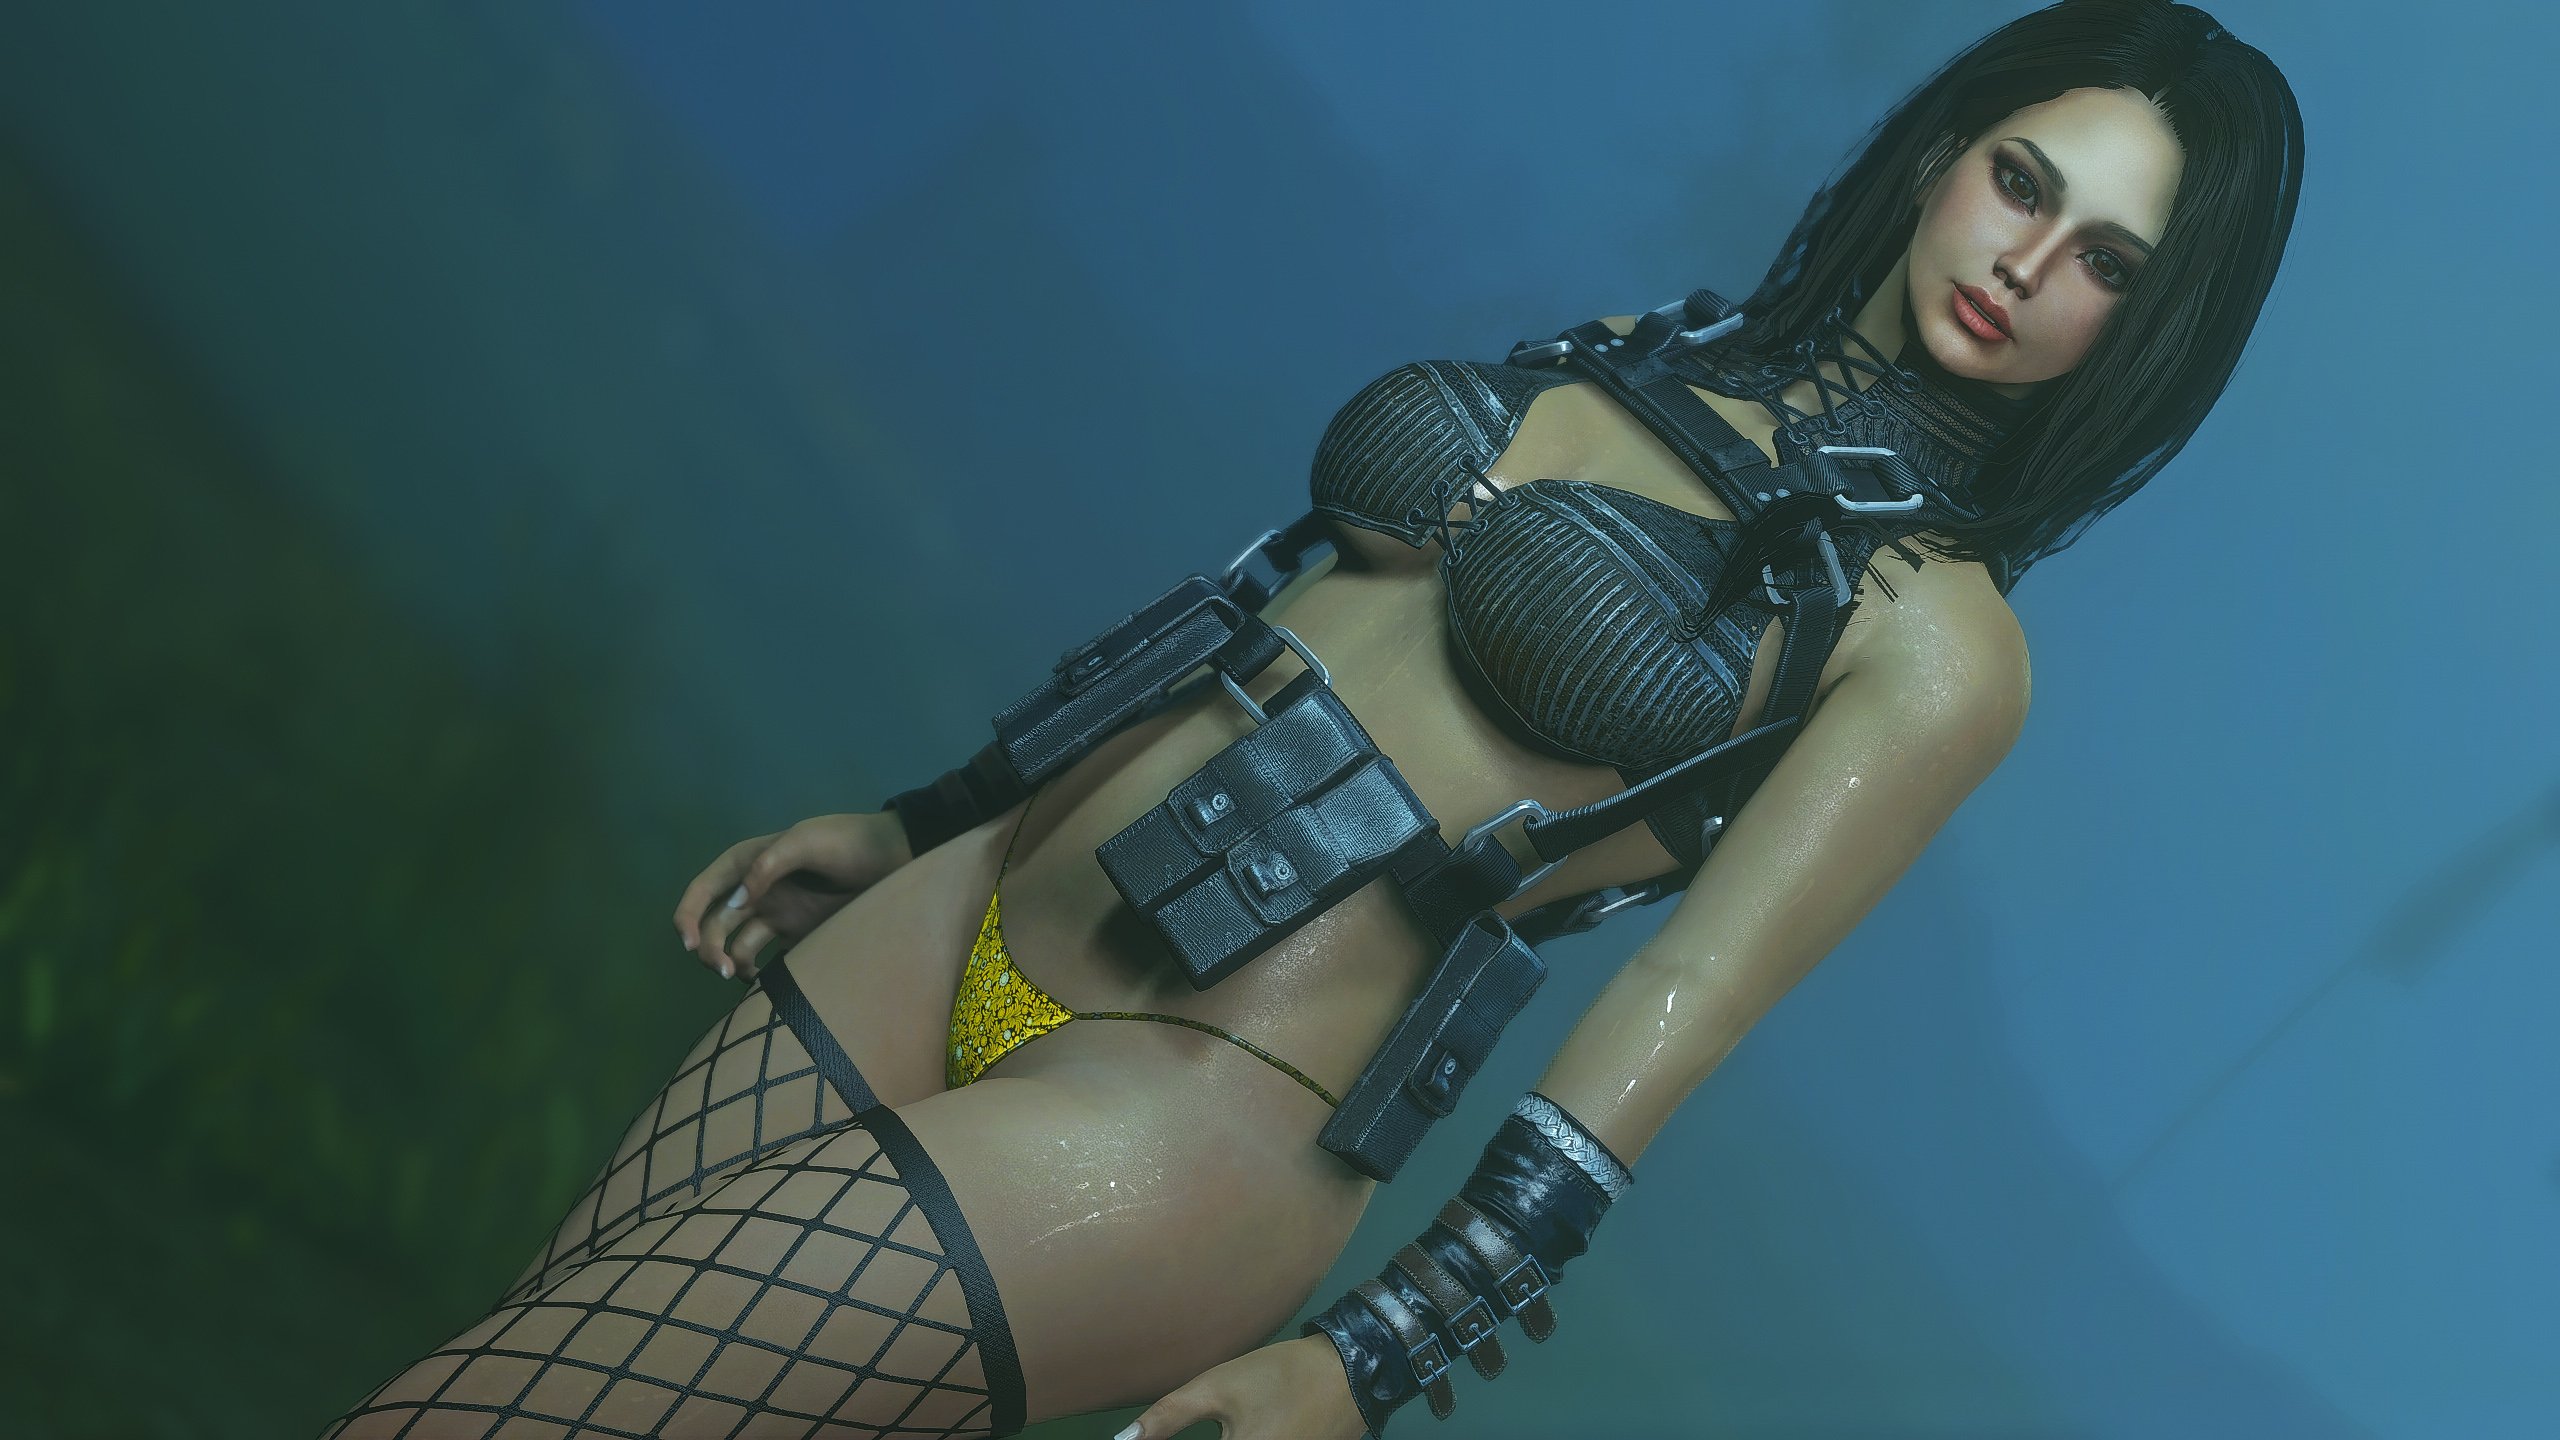 Vtaw workshop fallout 4 clothing armor mods фото 31